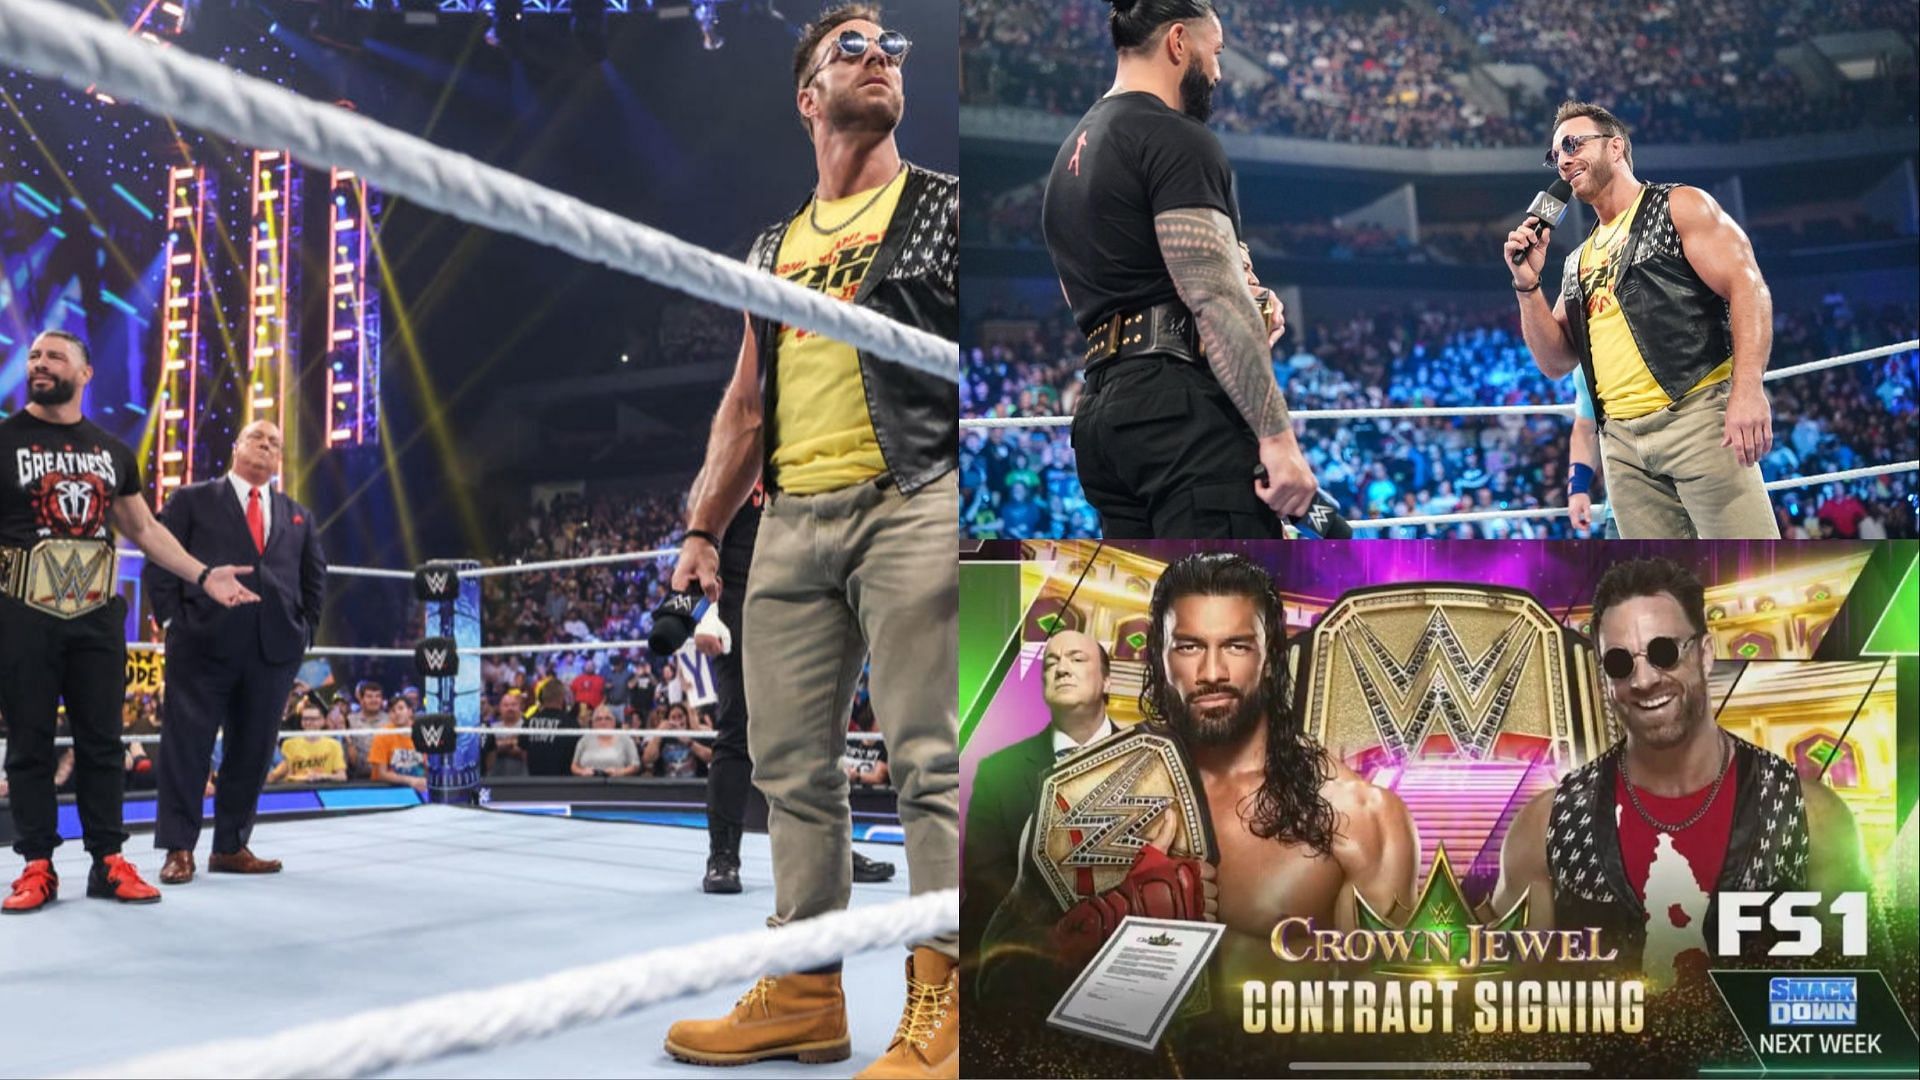 LA Knight and Roman Reigns will sign the contract next week on SmackDown.